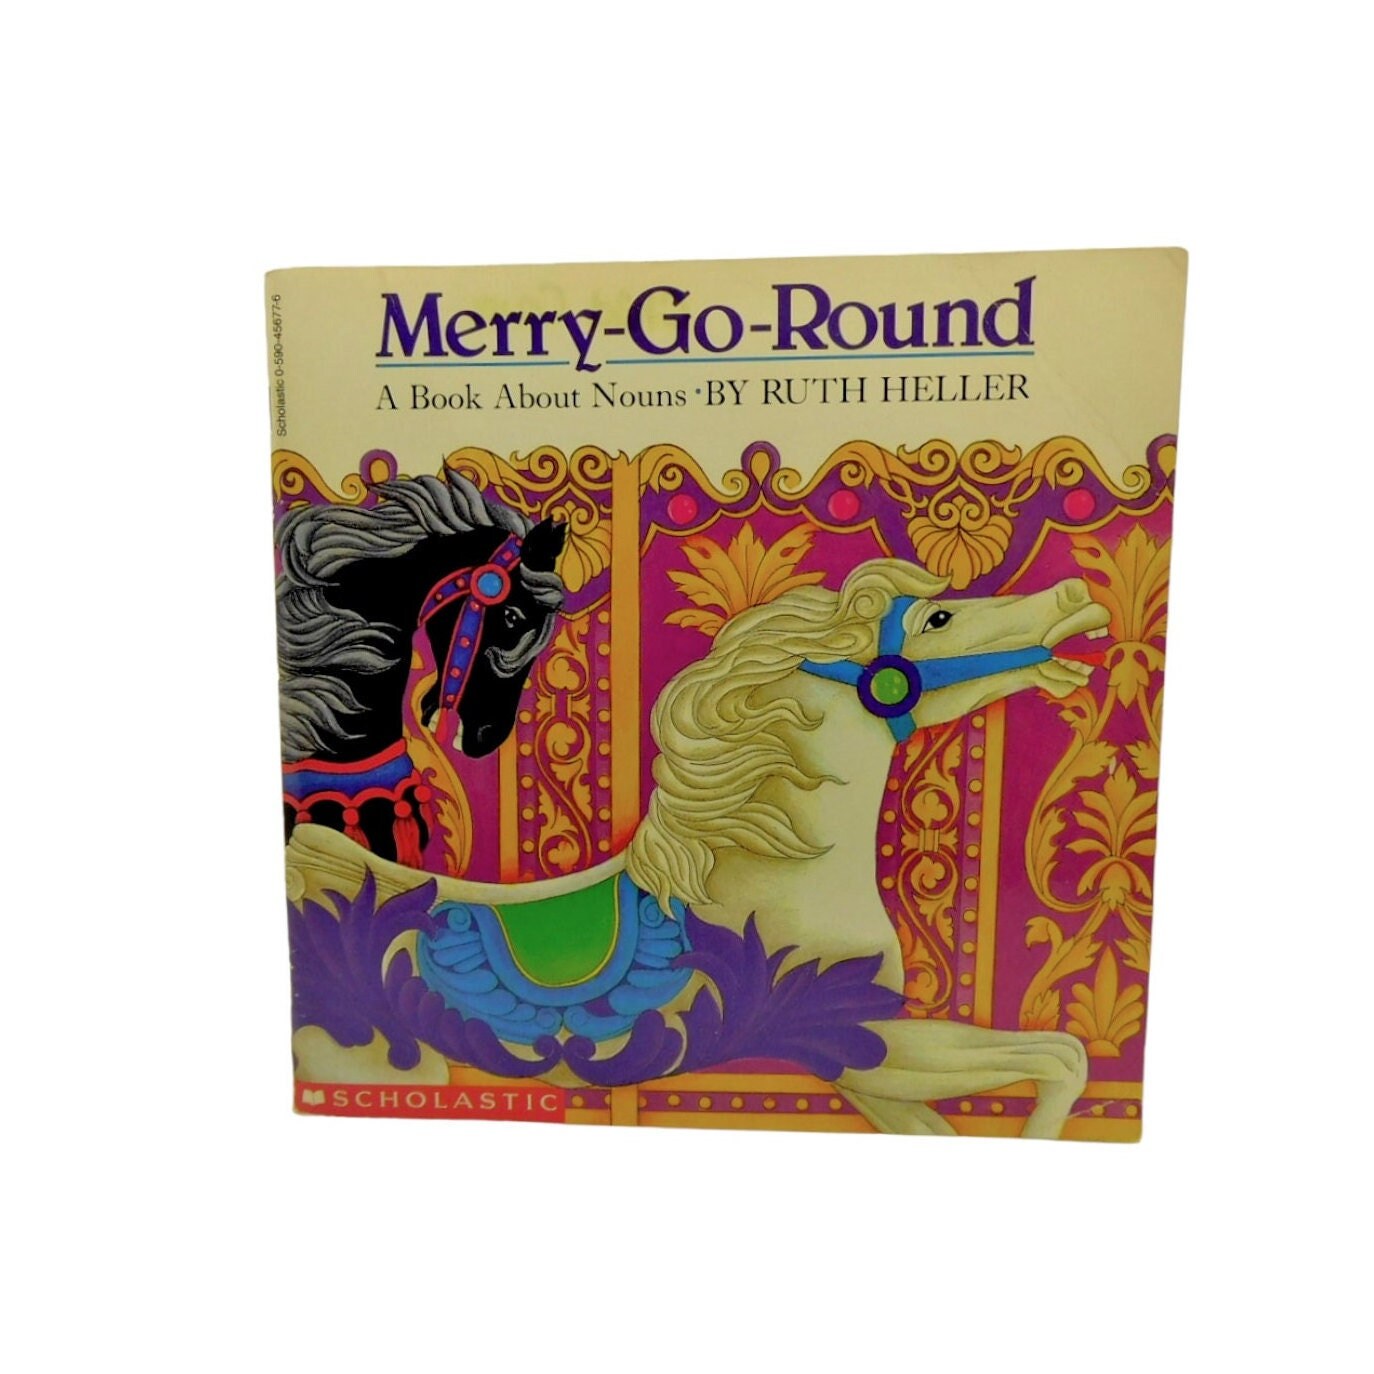 Merry-Go-Round by Ruth Heller 1990